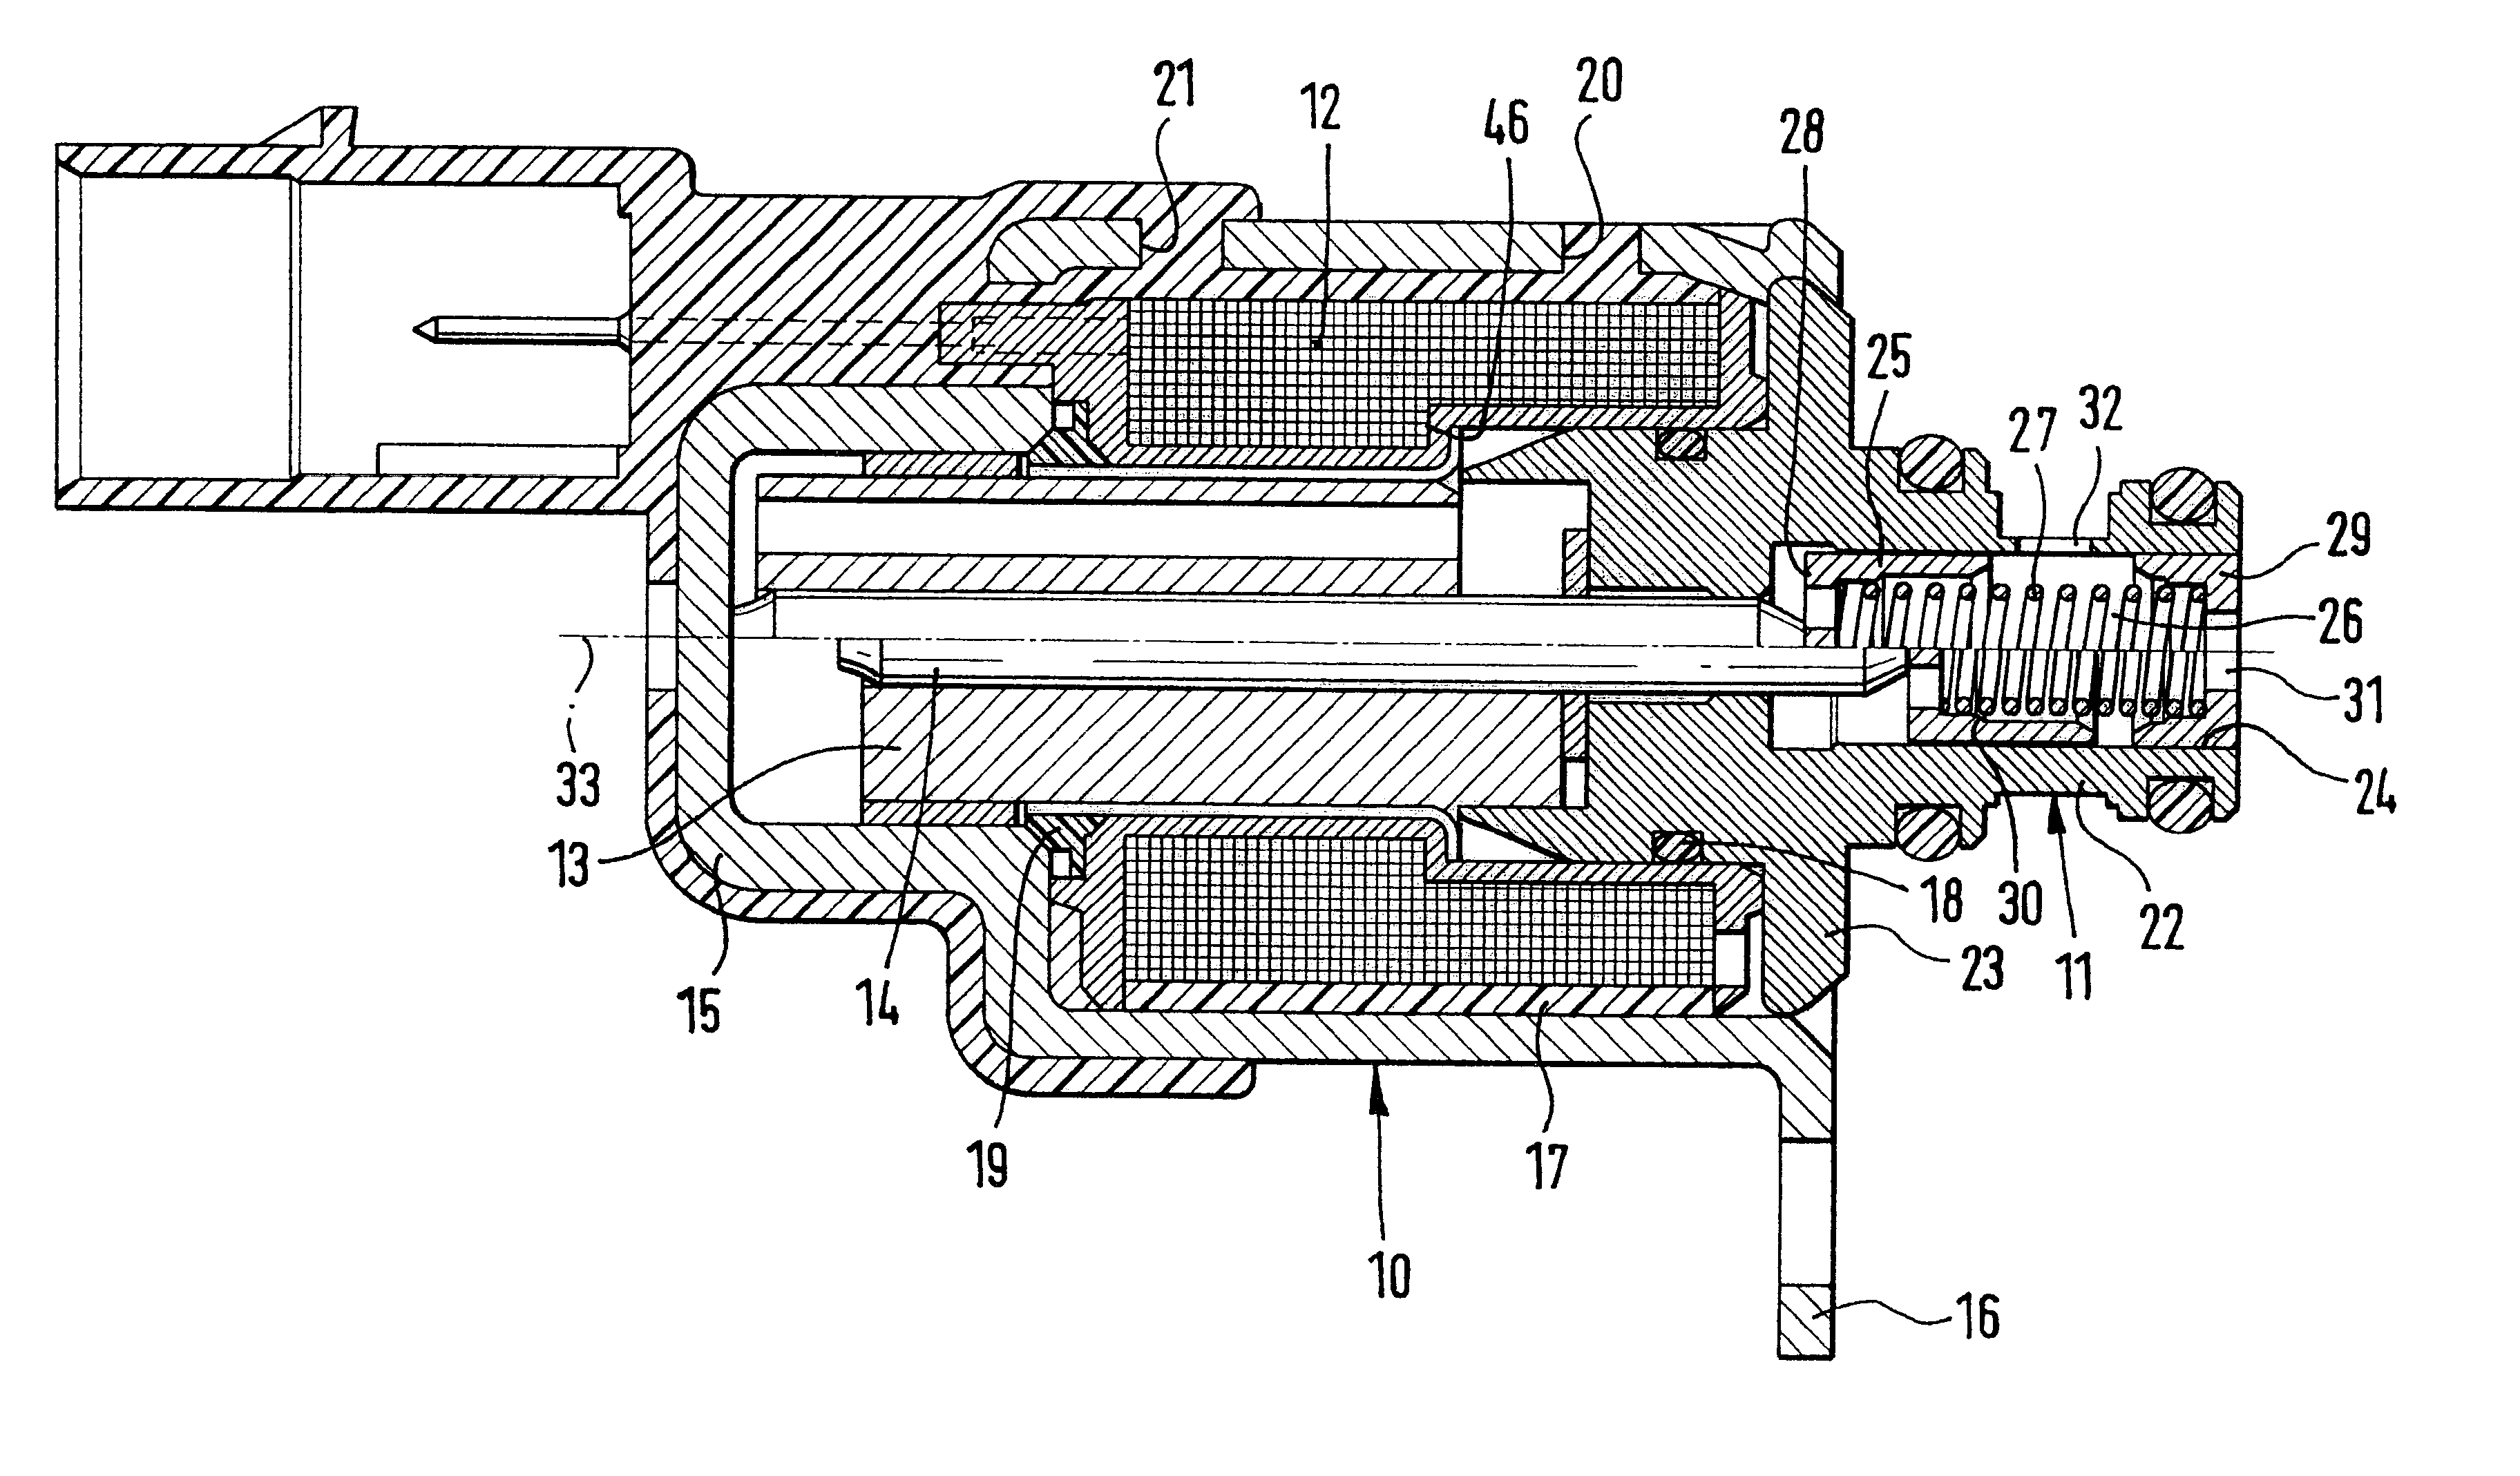 Metering unit for a fuel injection system for internal combustion engines